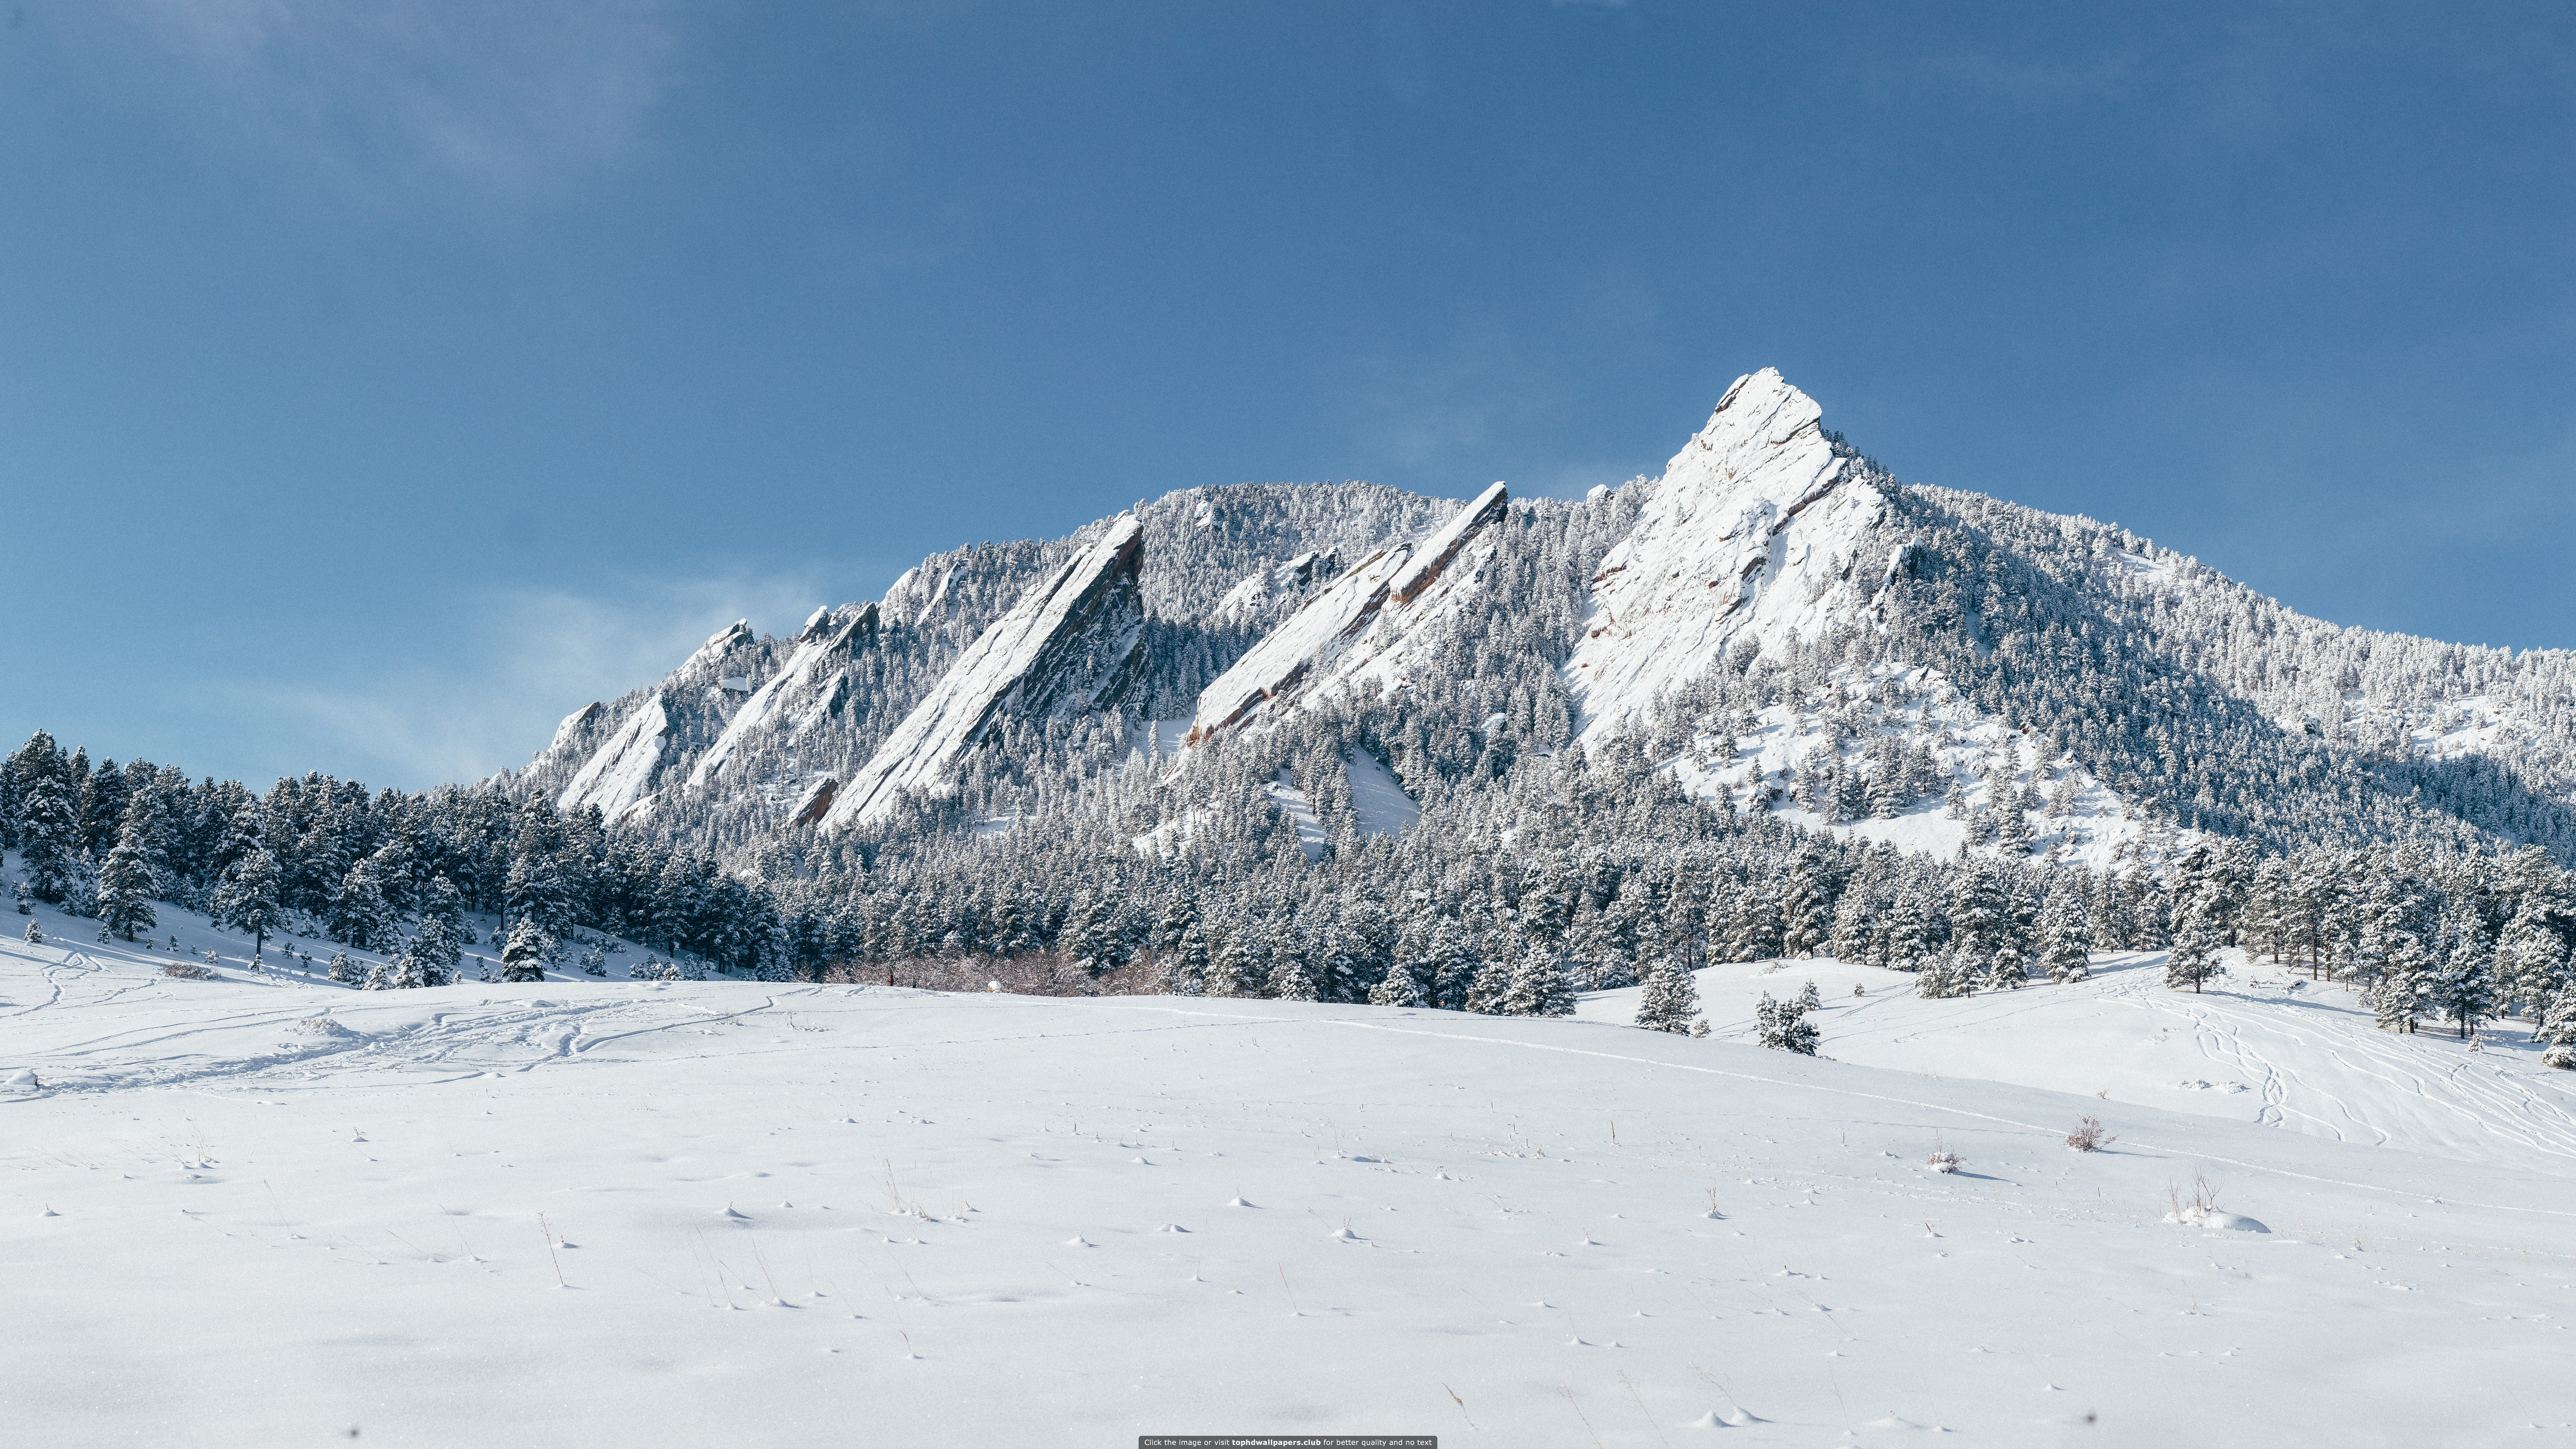 Best boulder wallpapers for your PC, Mac or Mobile Device